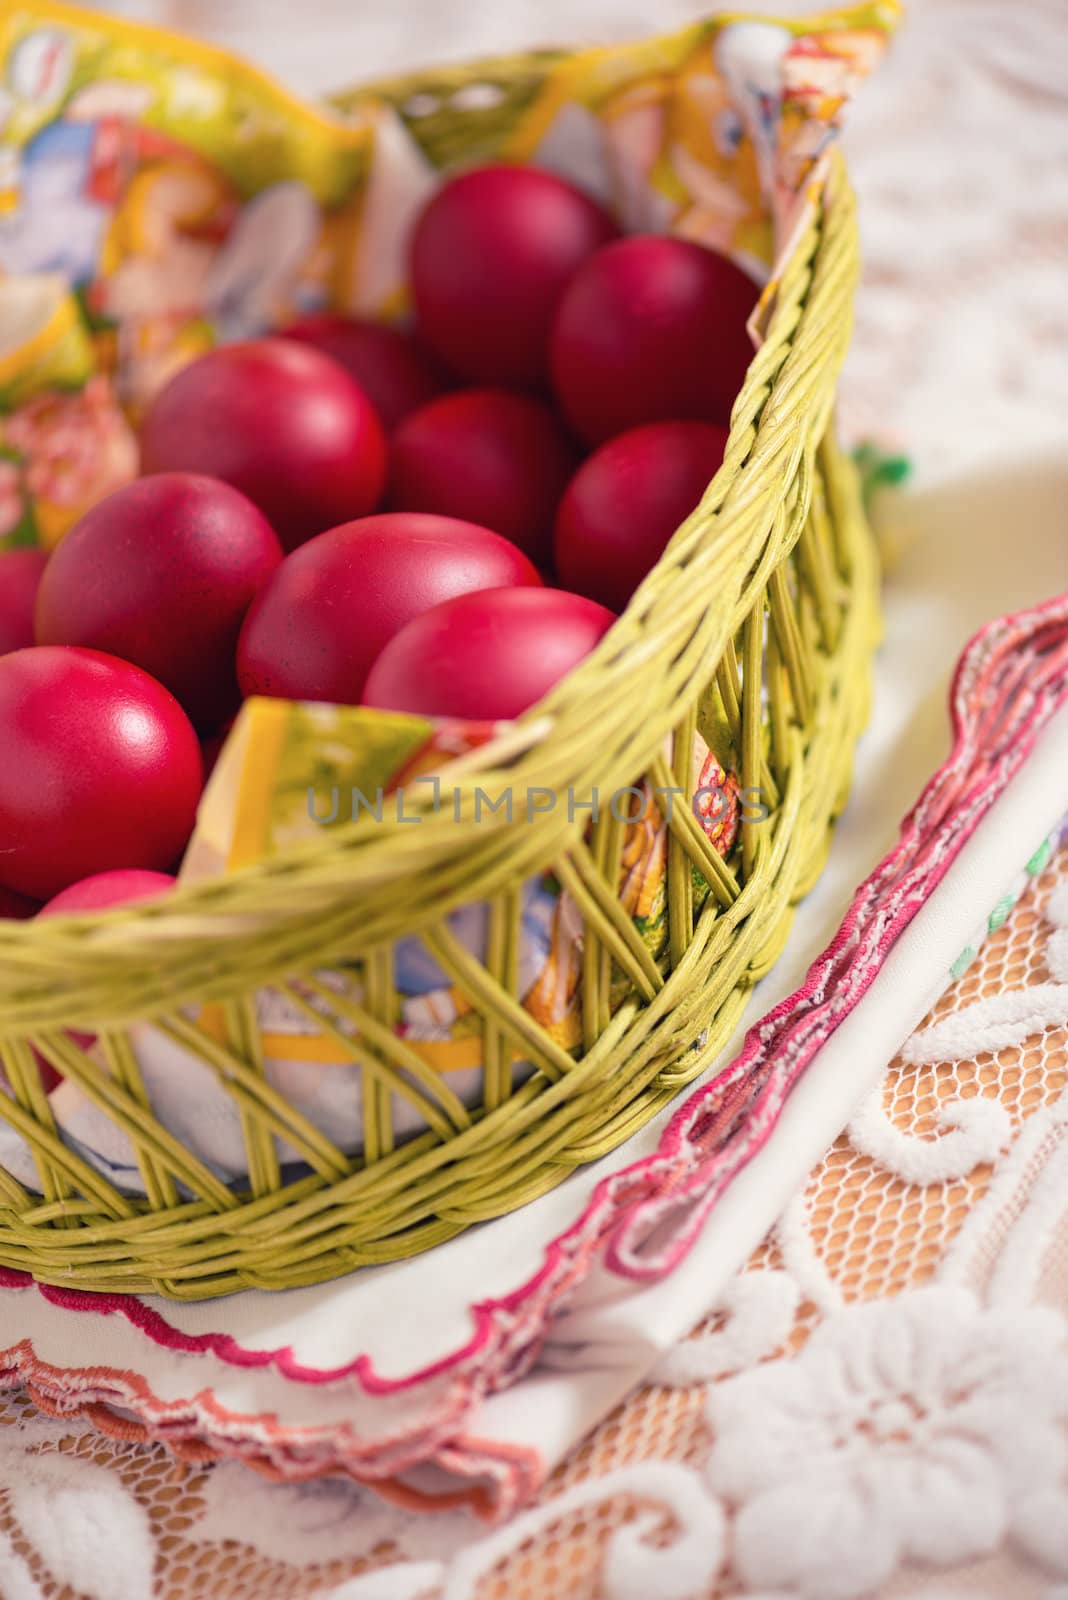 Many of Red Easter Eggs in a Yellow Basket